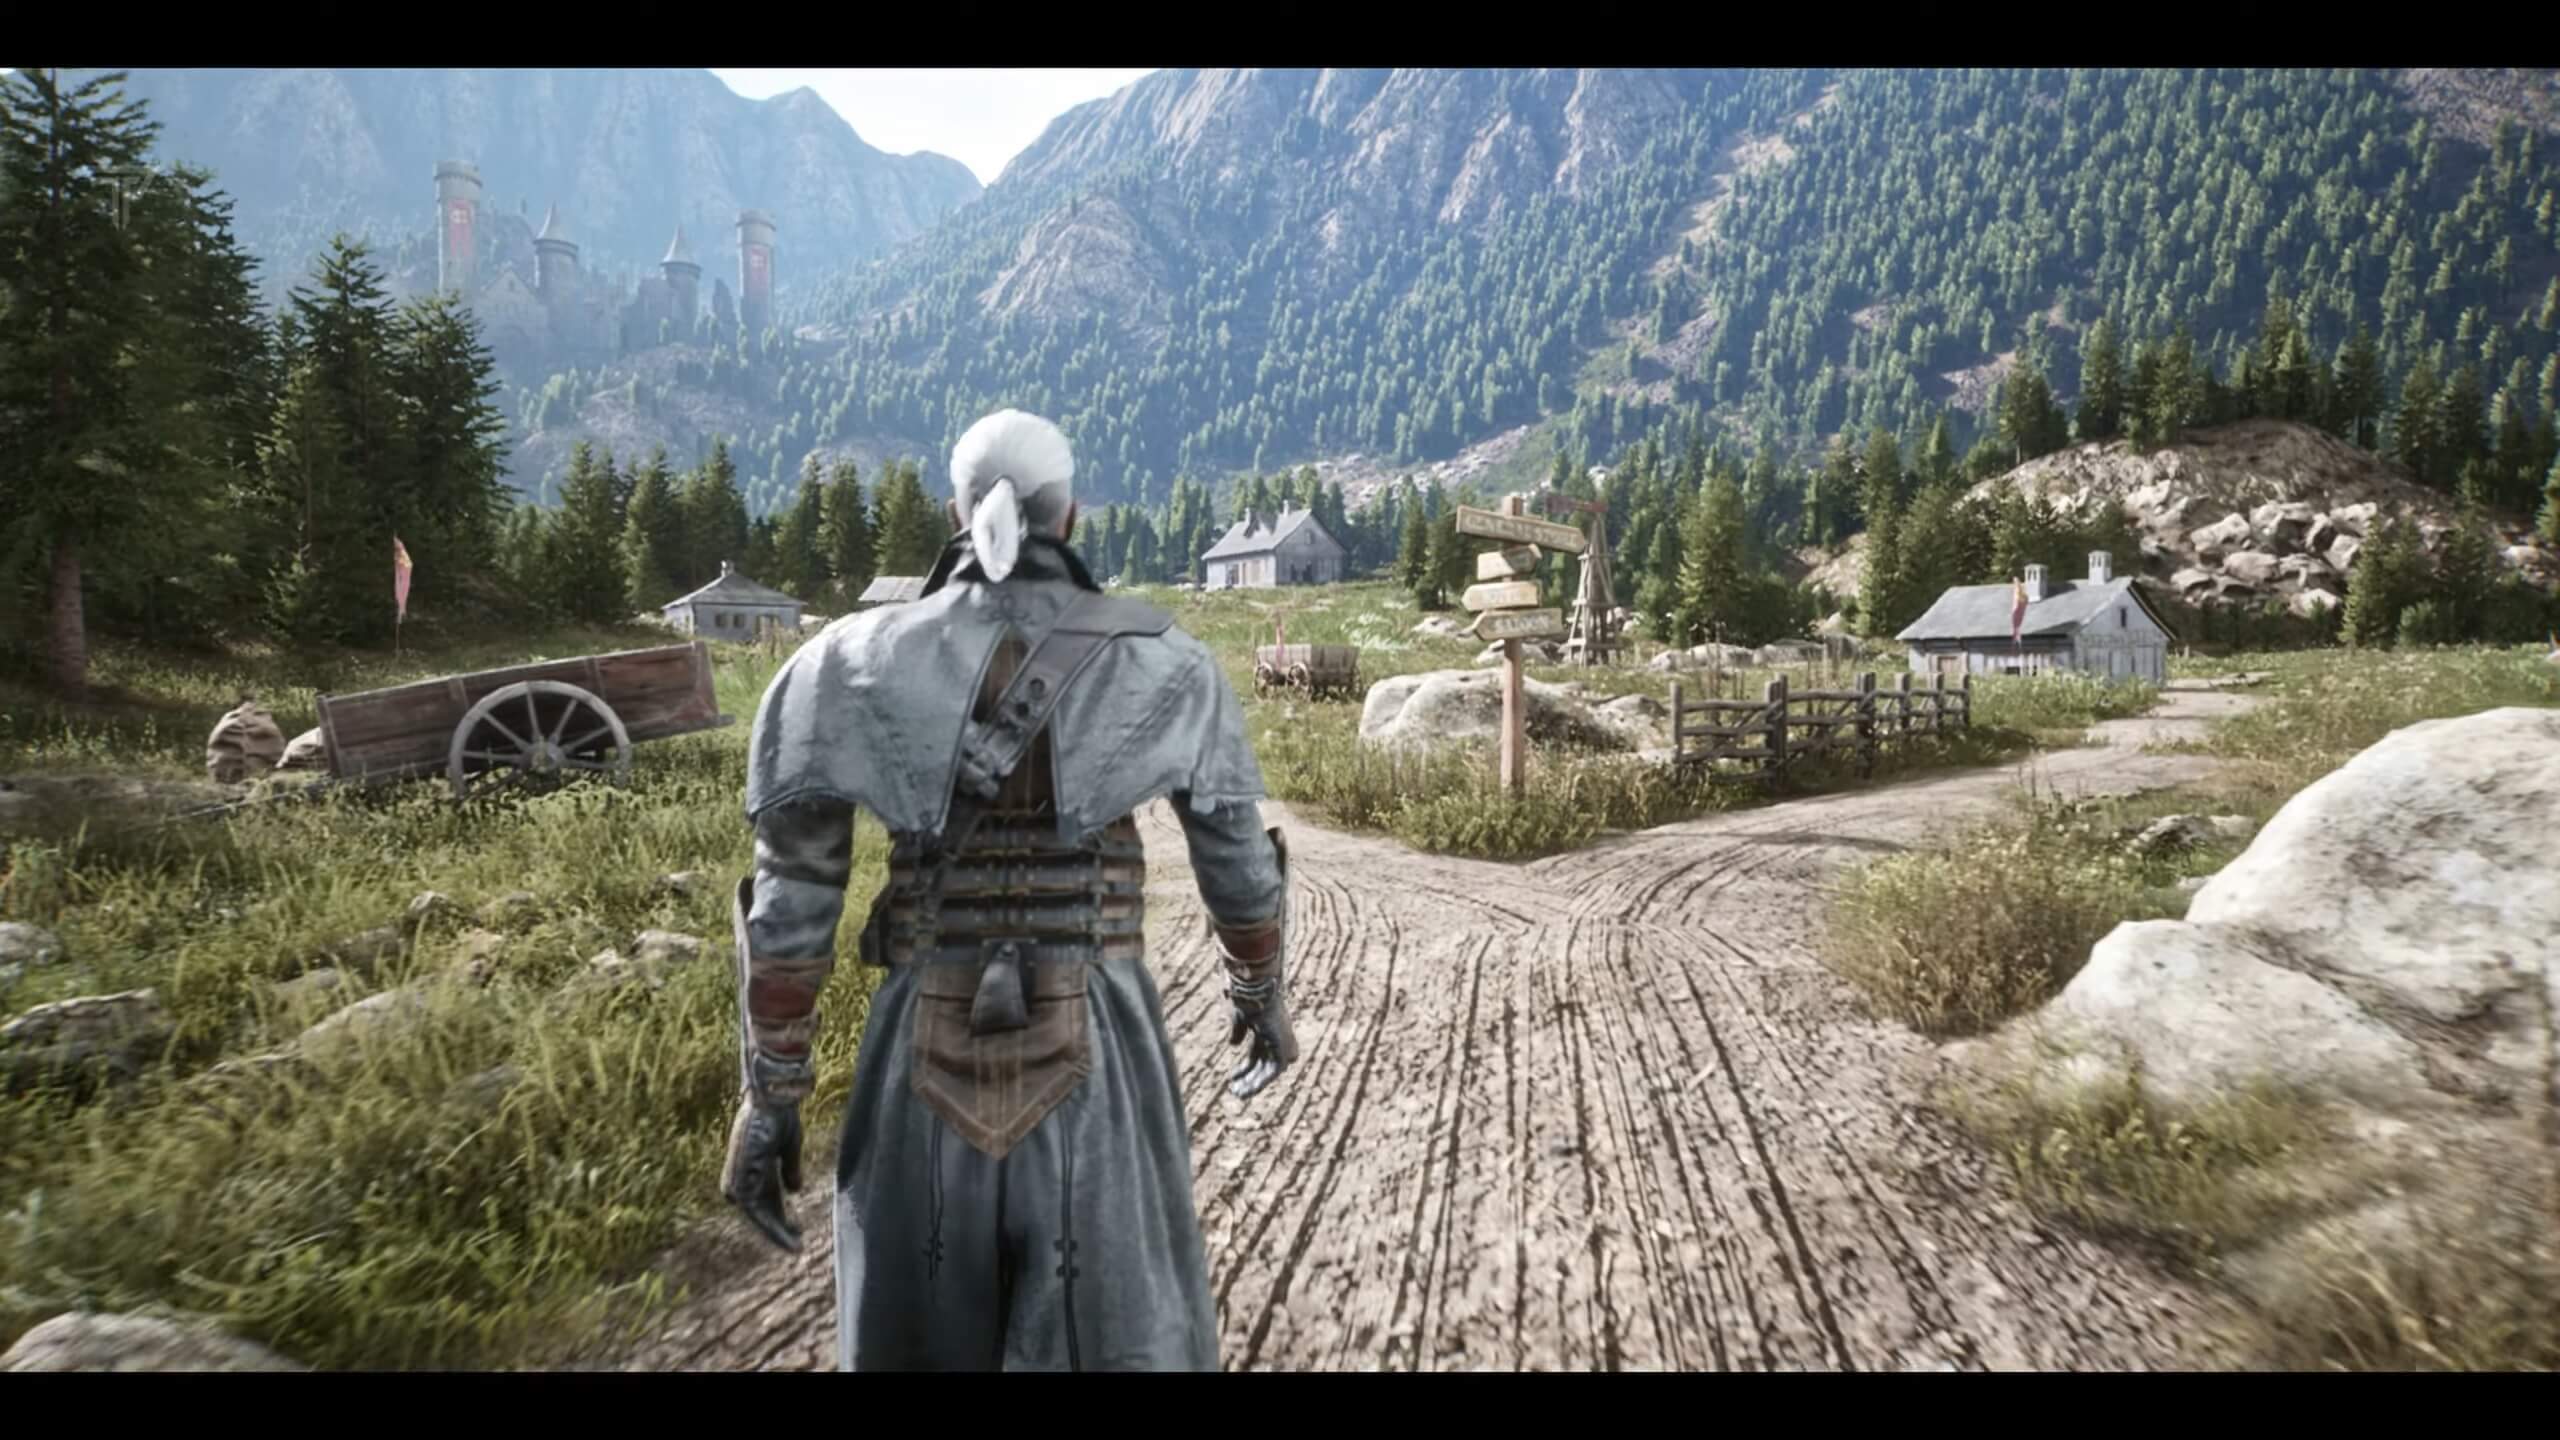 Witcher 4 Dev CD Projekt Red Explains Why It's Using Unreal Engine